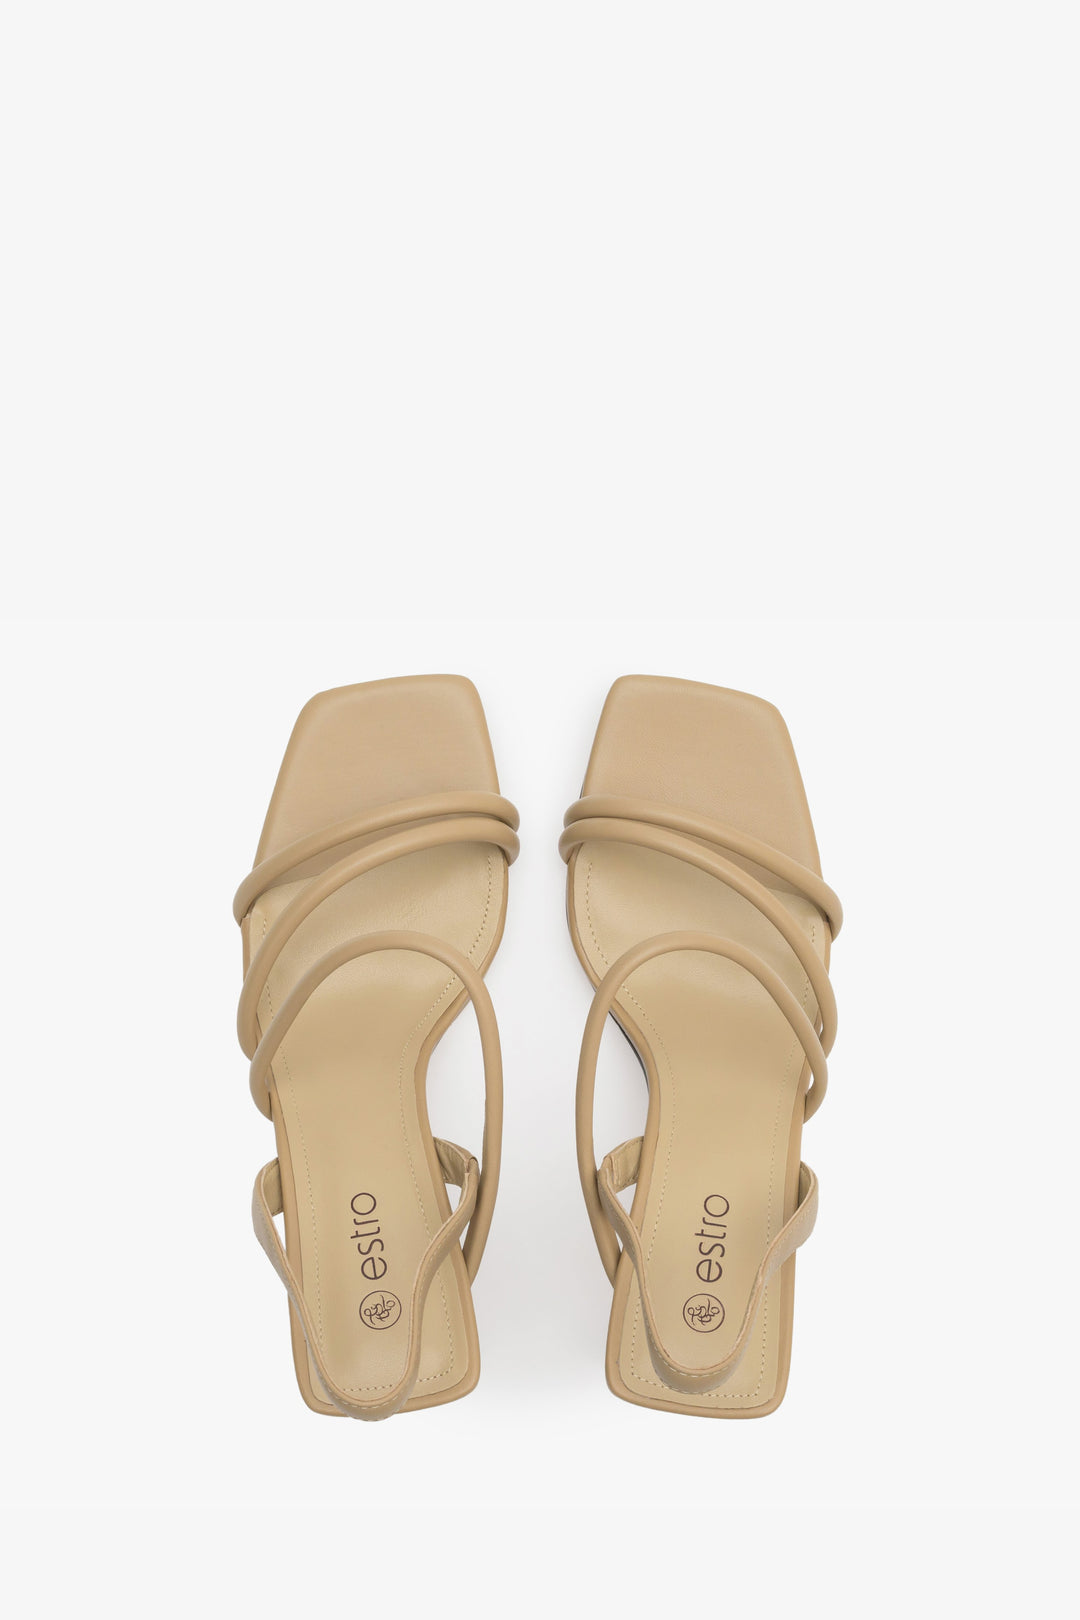 Women's sand beige strappy sandals made of natural leather, Estro brand - presentation of the footwear from above.